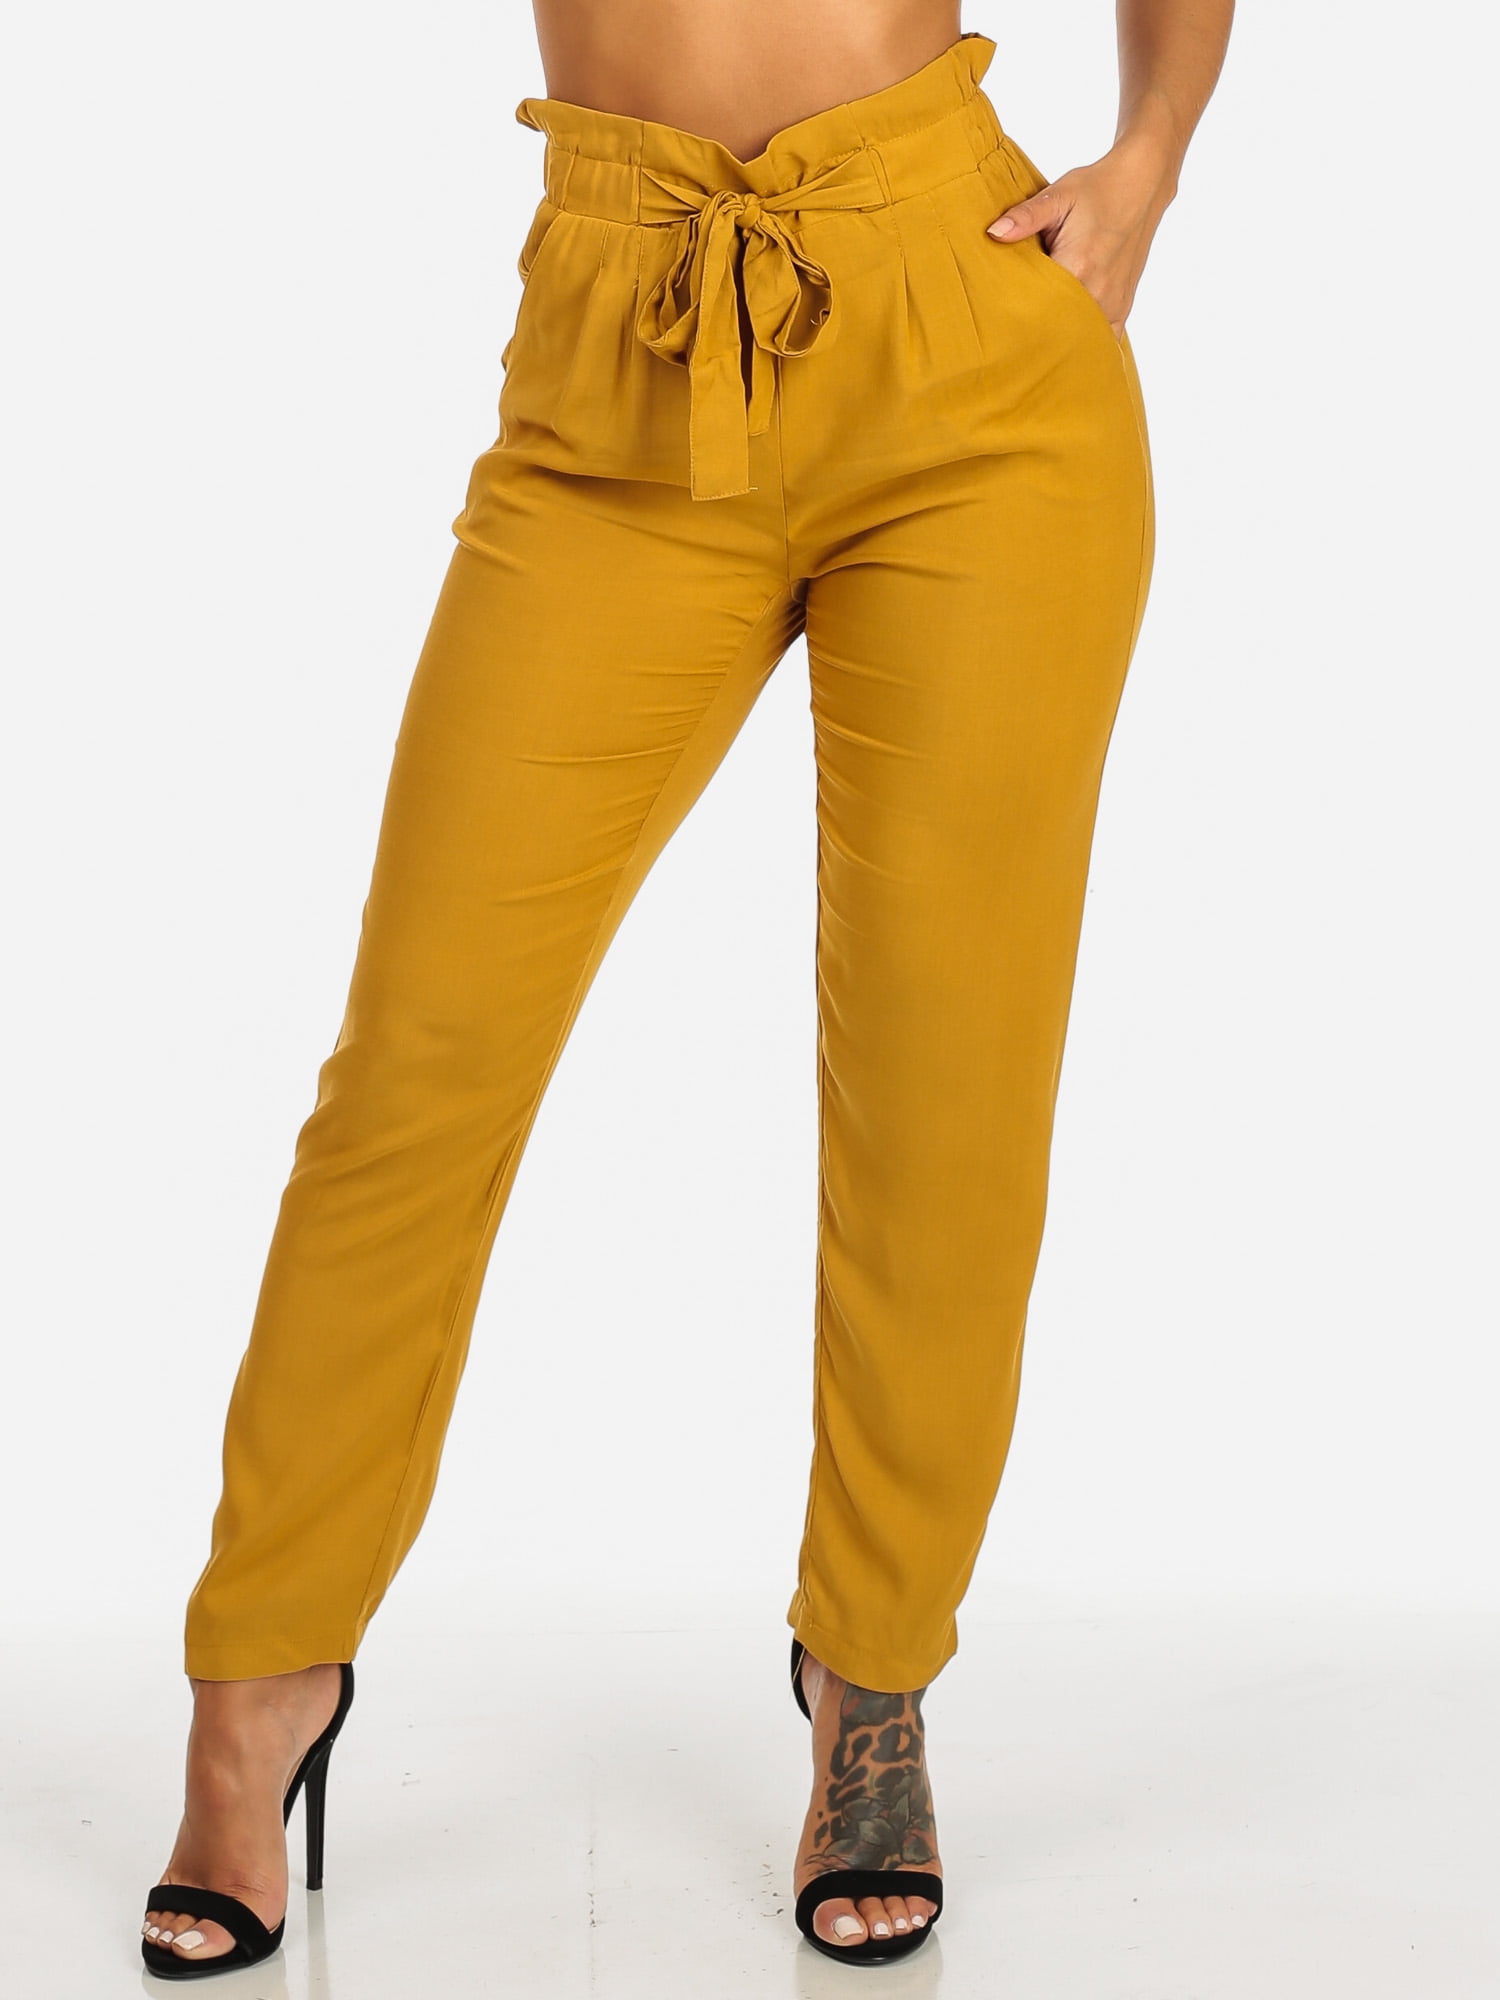 mustard colored jeans